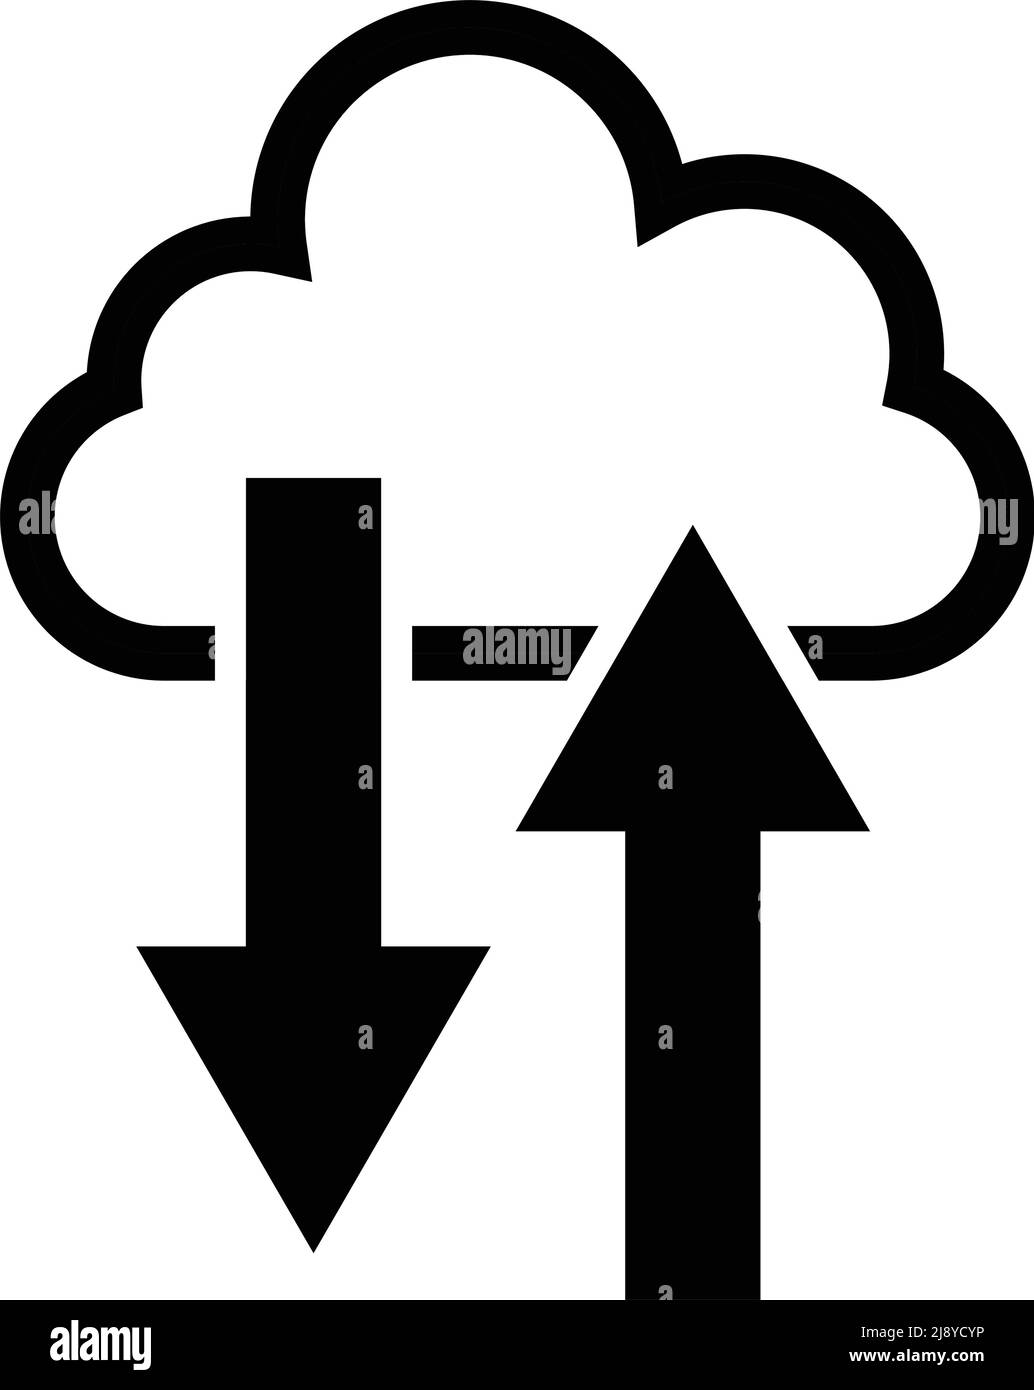 Cloud upload and download icons. Editable vector. Stock Vector